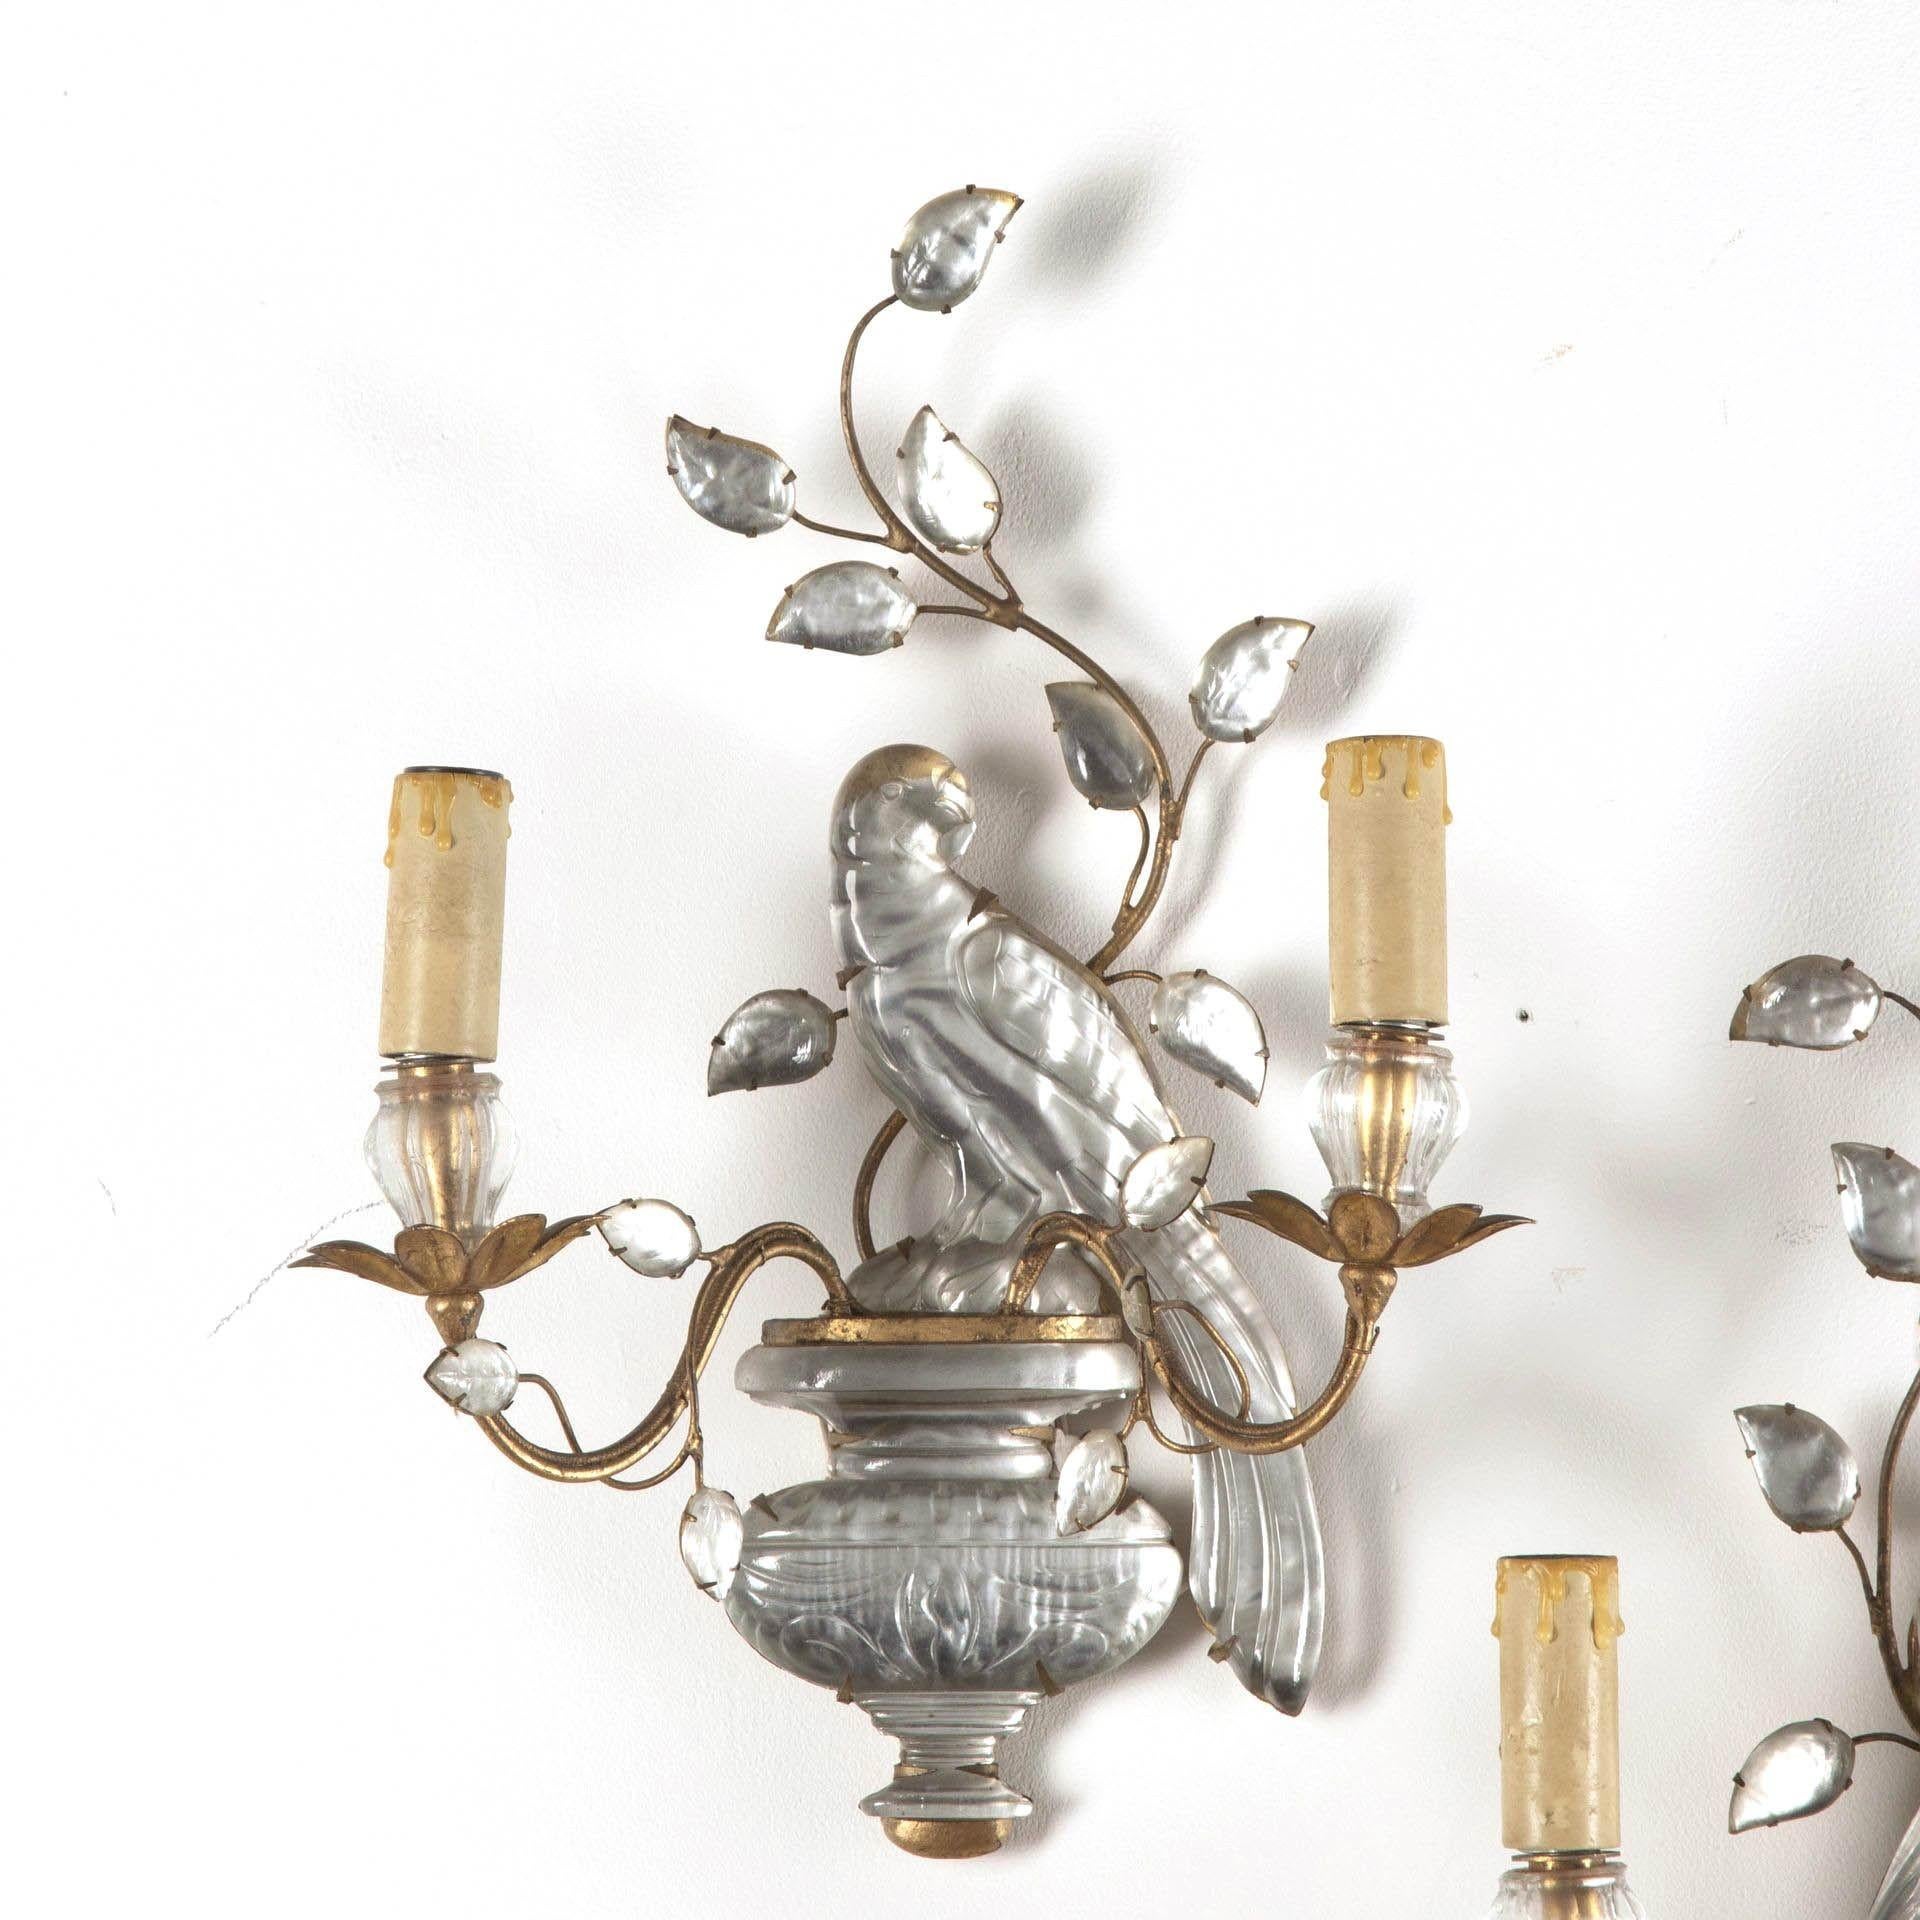 Pair of mid 20th century crystal wall appliques with parrot motif by Maison Bagues, Paris.
Each with two candle brackets and bearing original makers label on reverse.
This item has passed PAT testing according to UK standards.